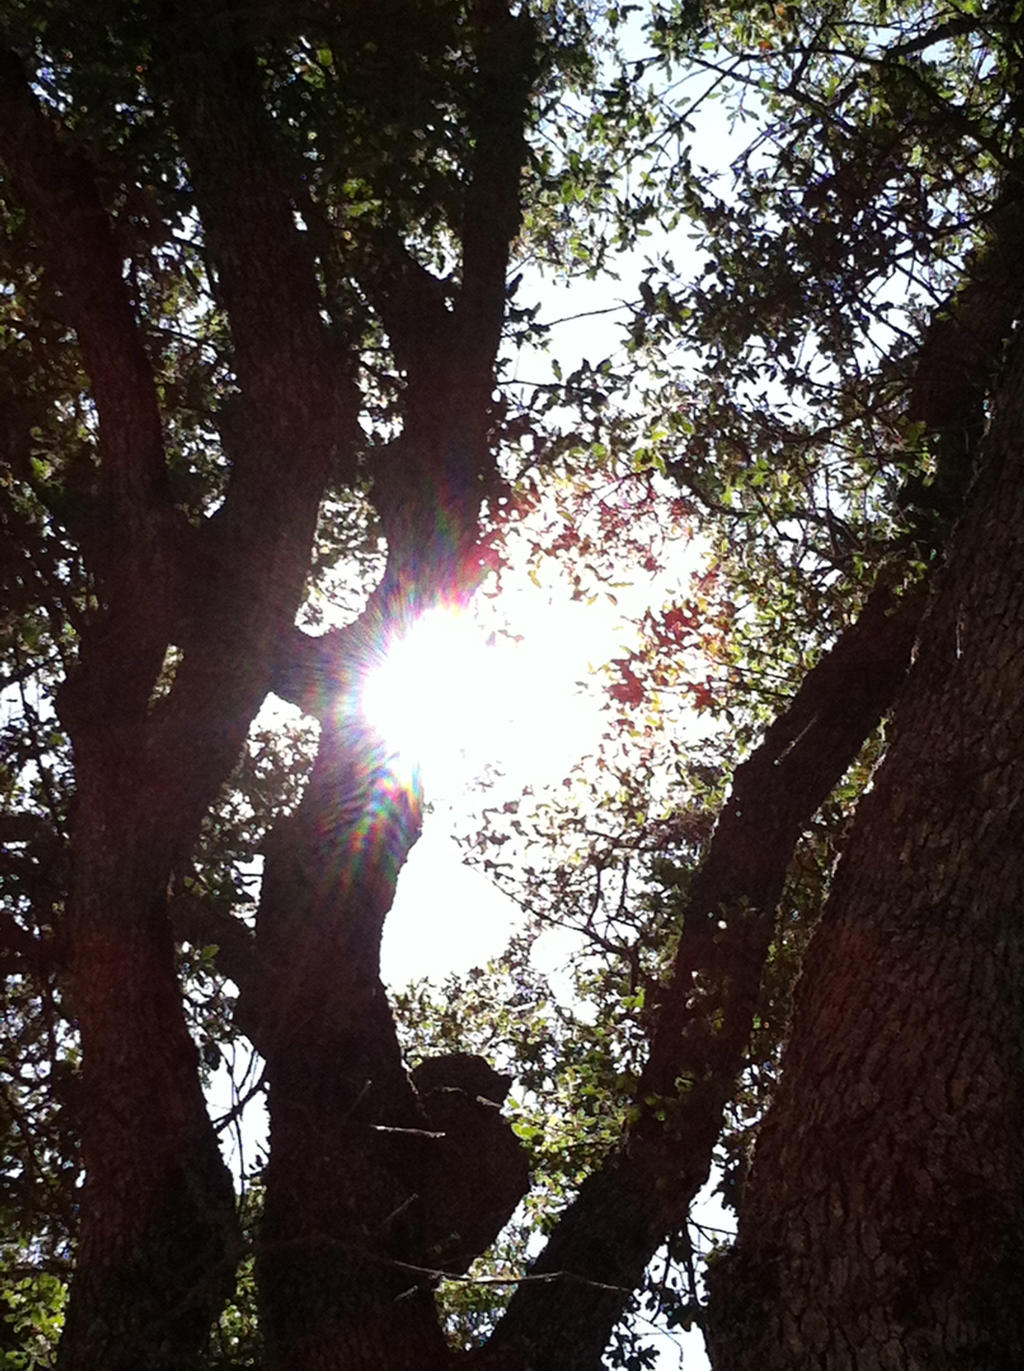 Sunlight in the Branches